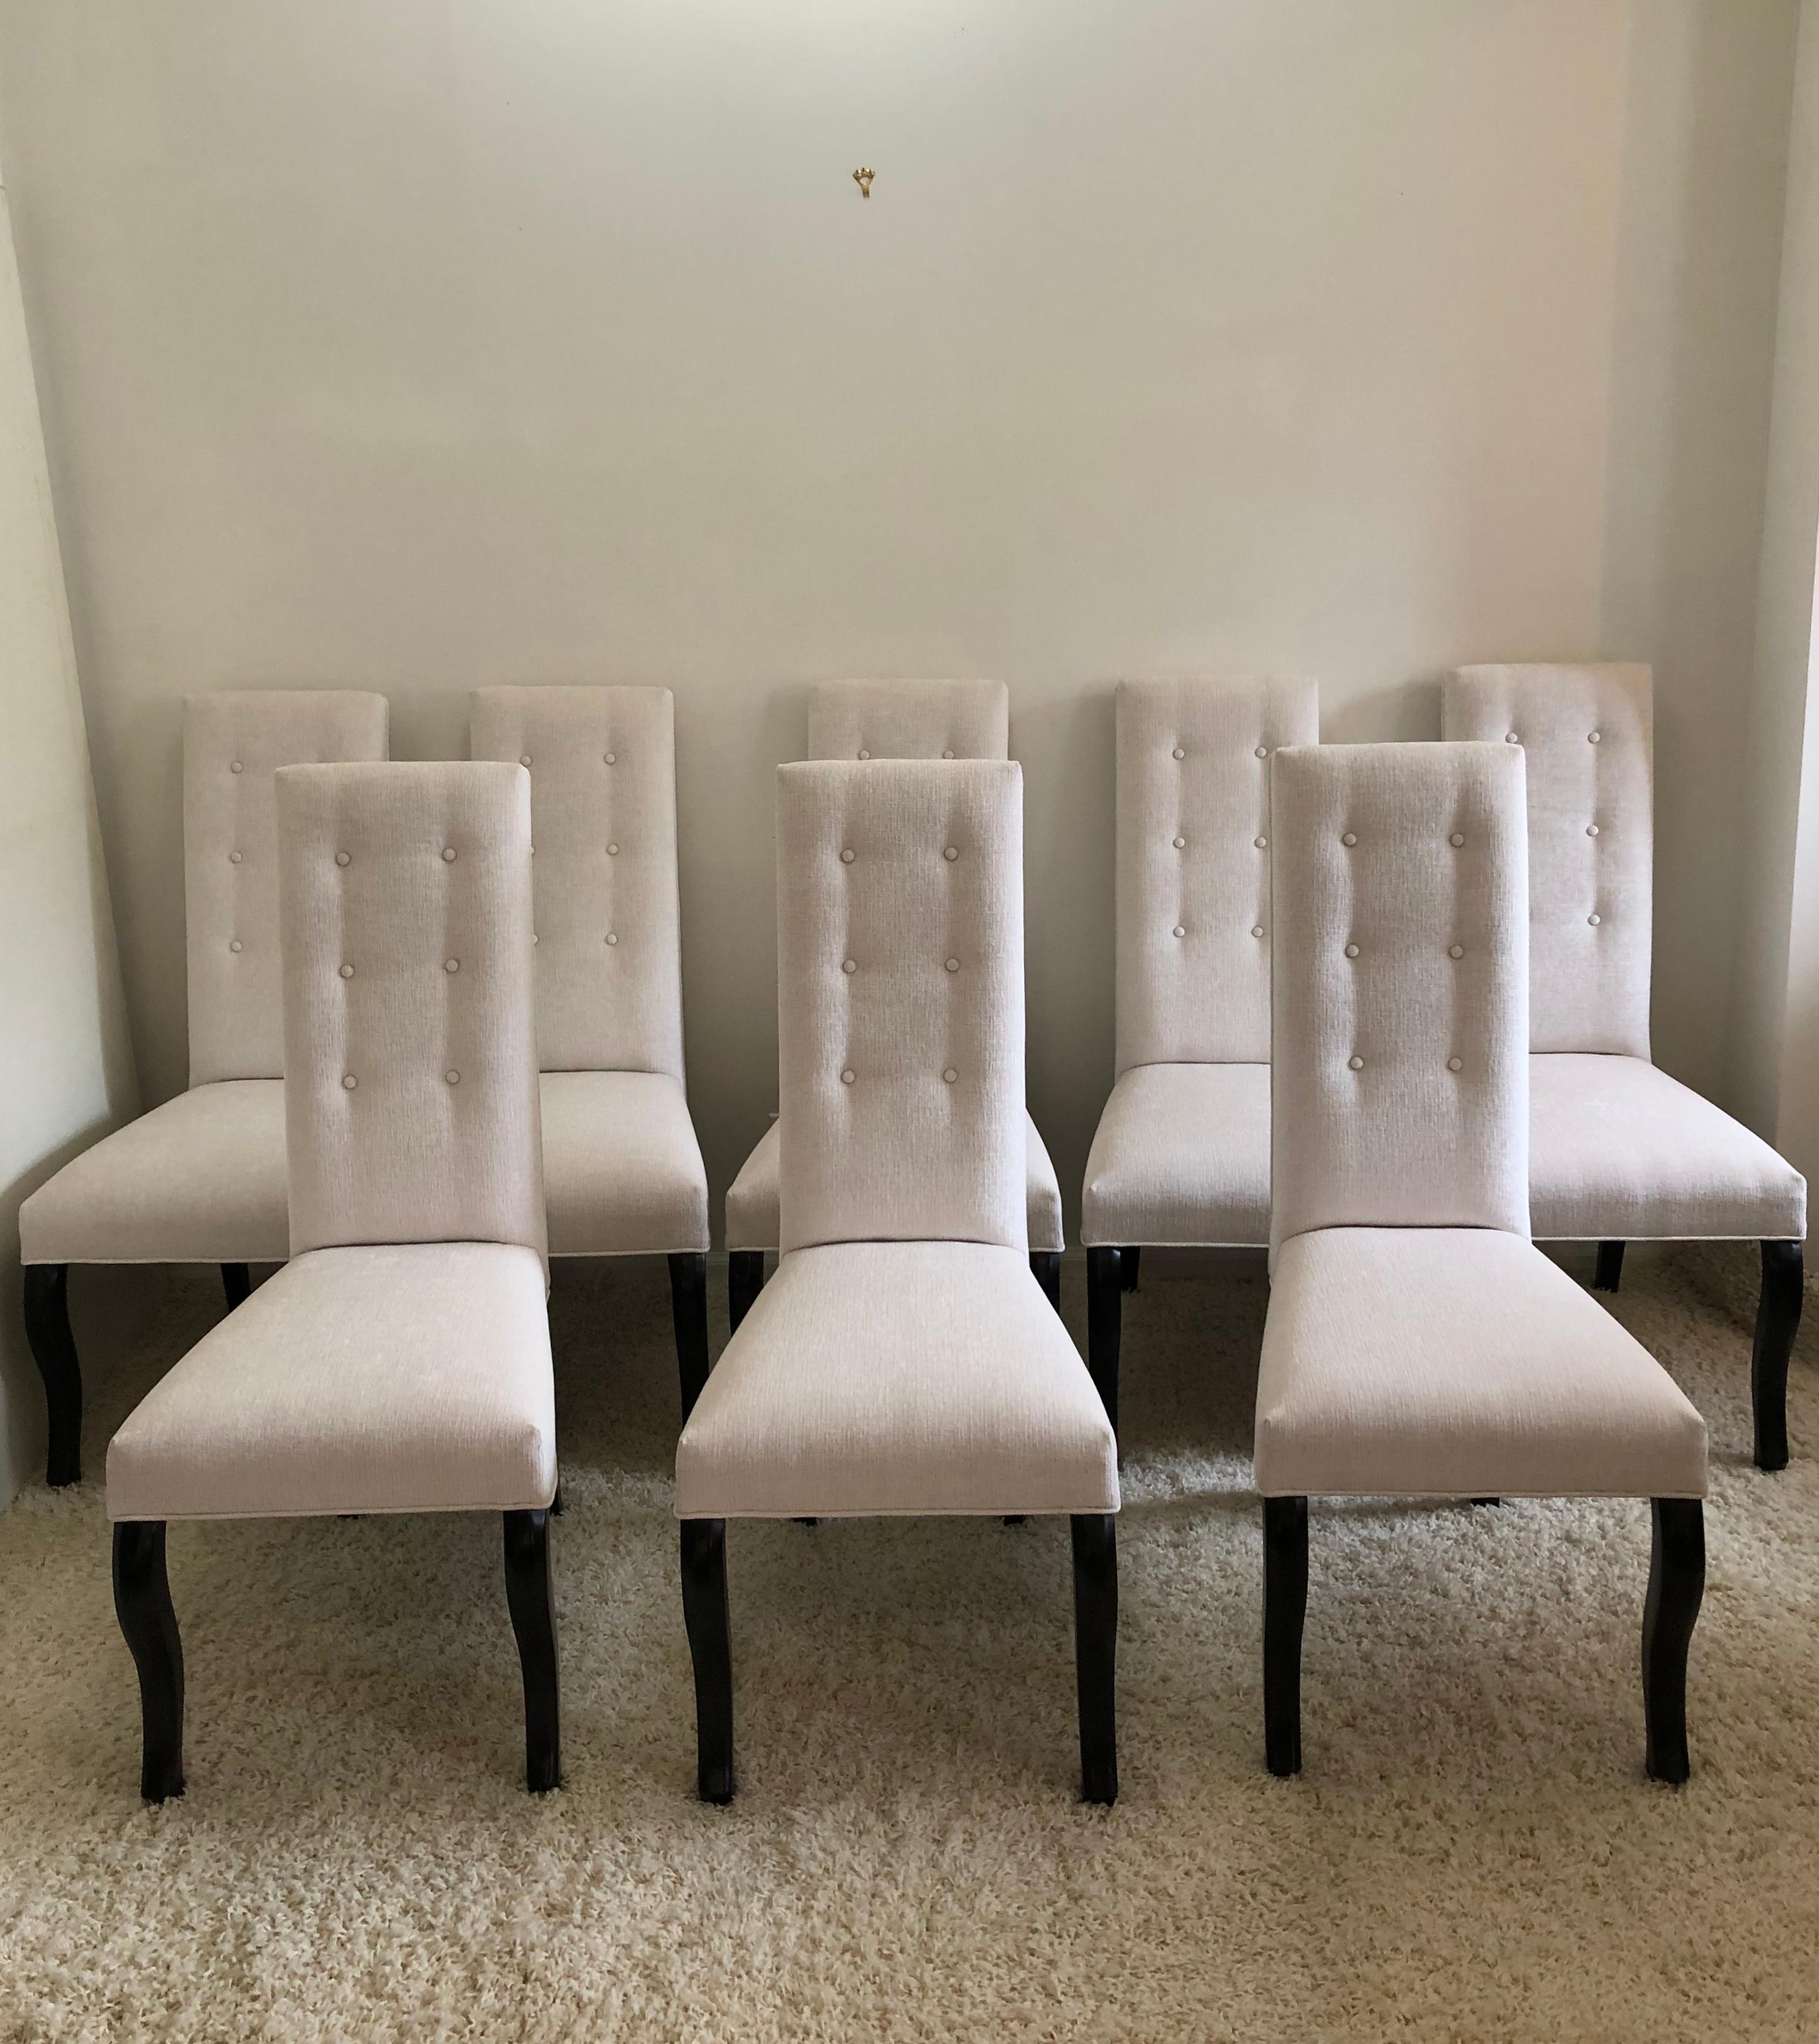 Set of 8 Cleopatra black curved leg high back slim dining chairs, off-white fabric. Comfortable and supportive. Purchased with a Pucci di rossi table.